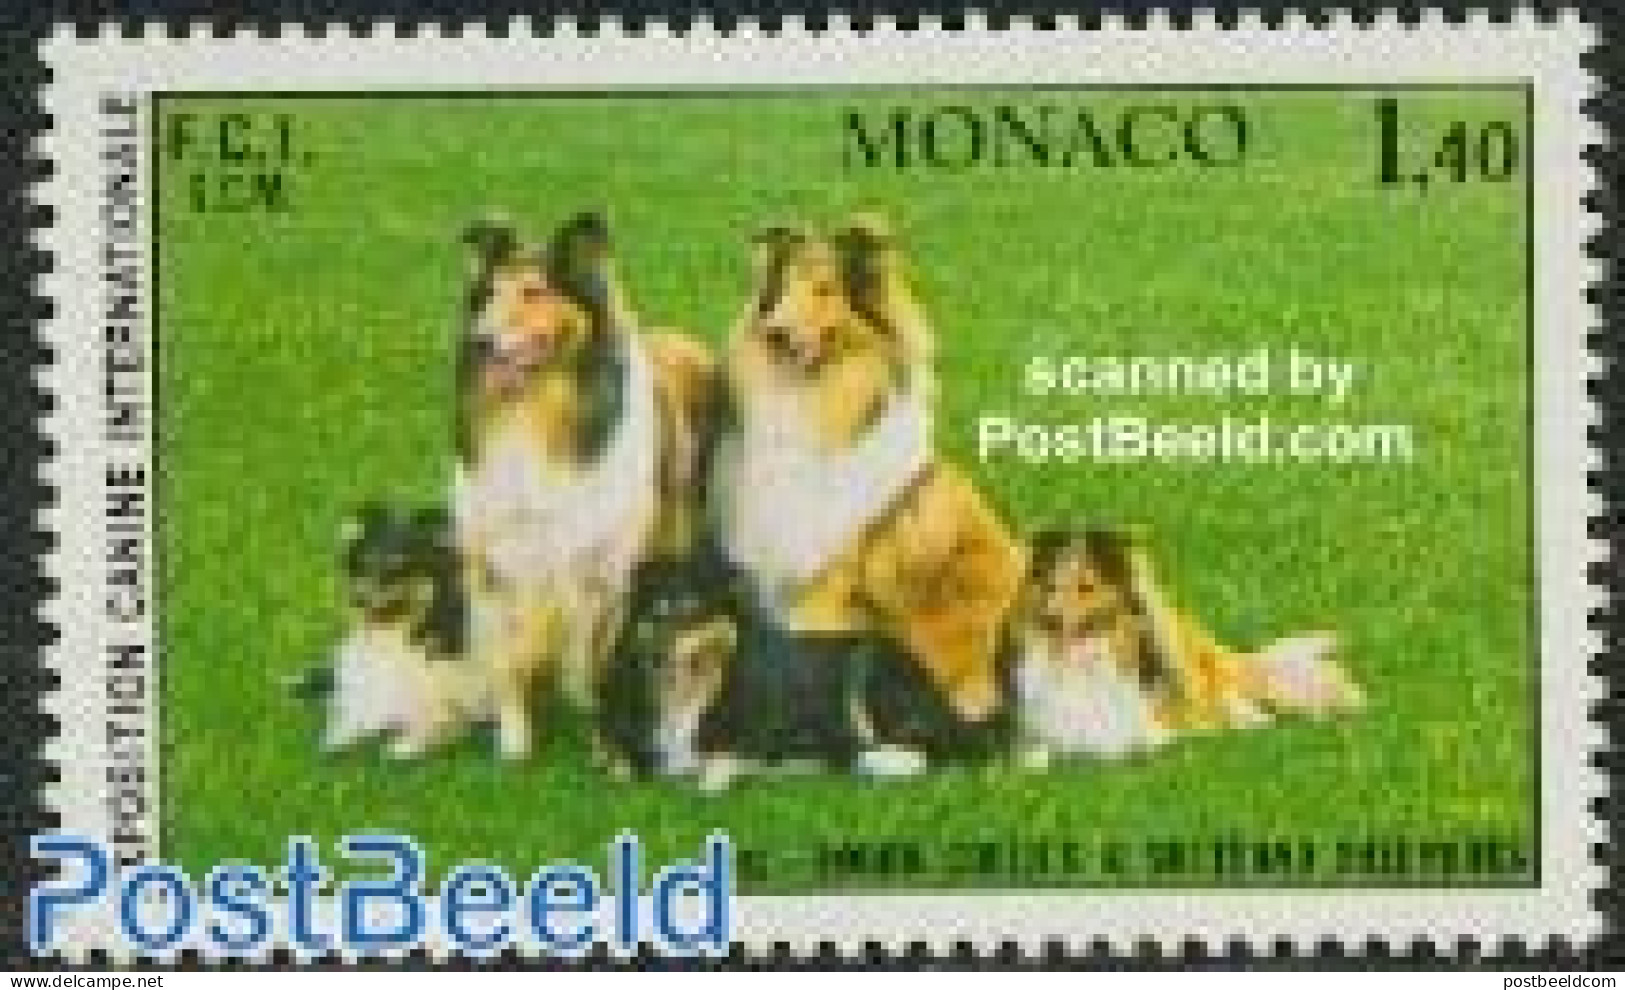 Monaco 1981 Dog Exposition 1v, Mint NH, Nature - Dogs - Neufs